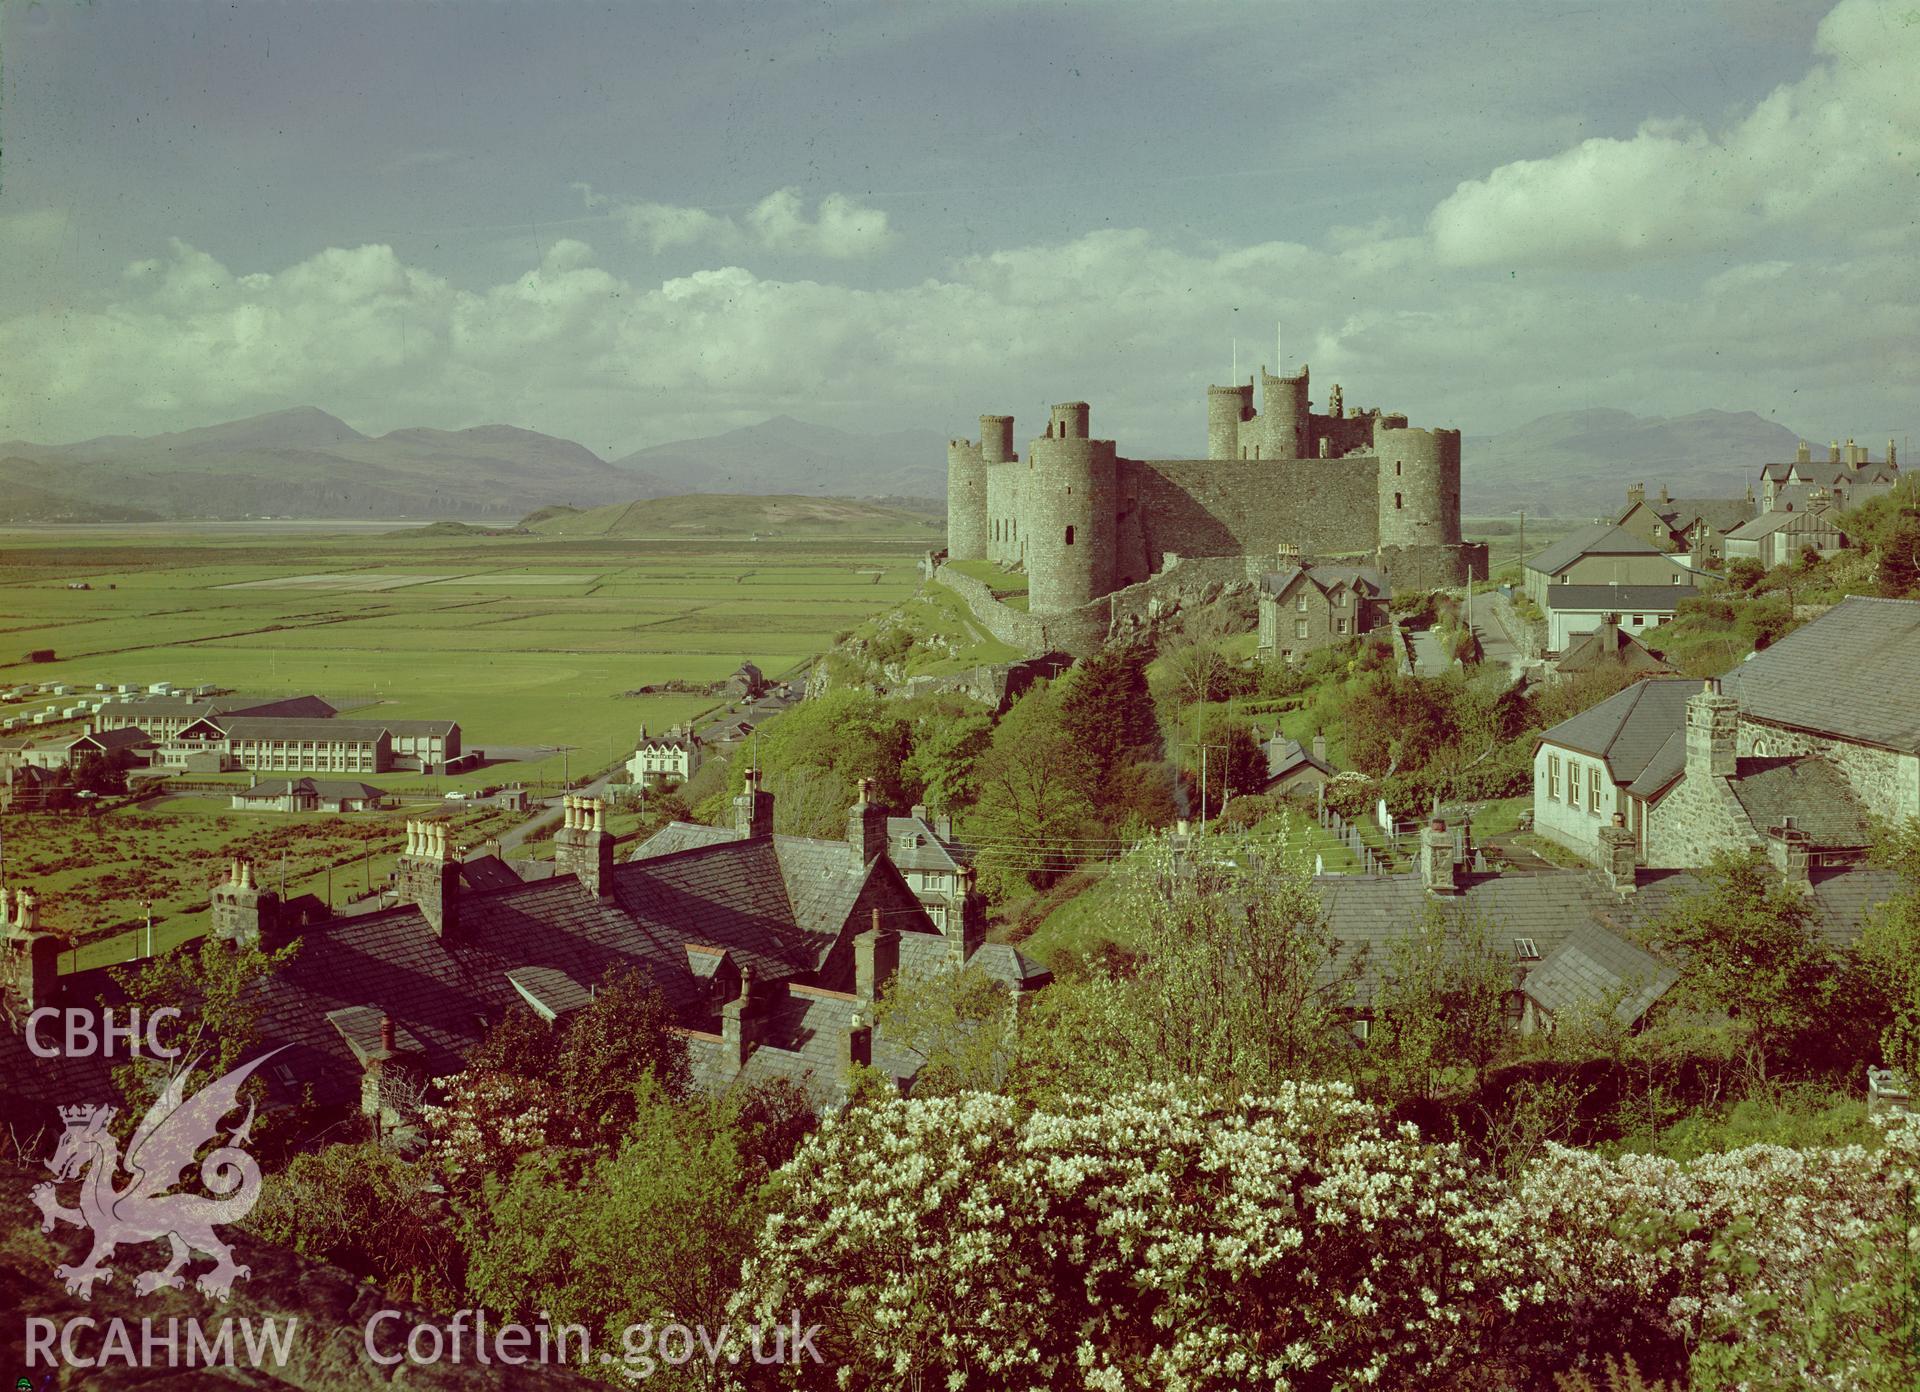 Digital copy of a nitrate negative showing view of Harlech Castle from the south.